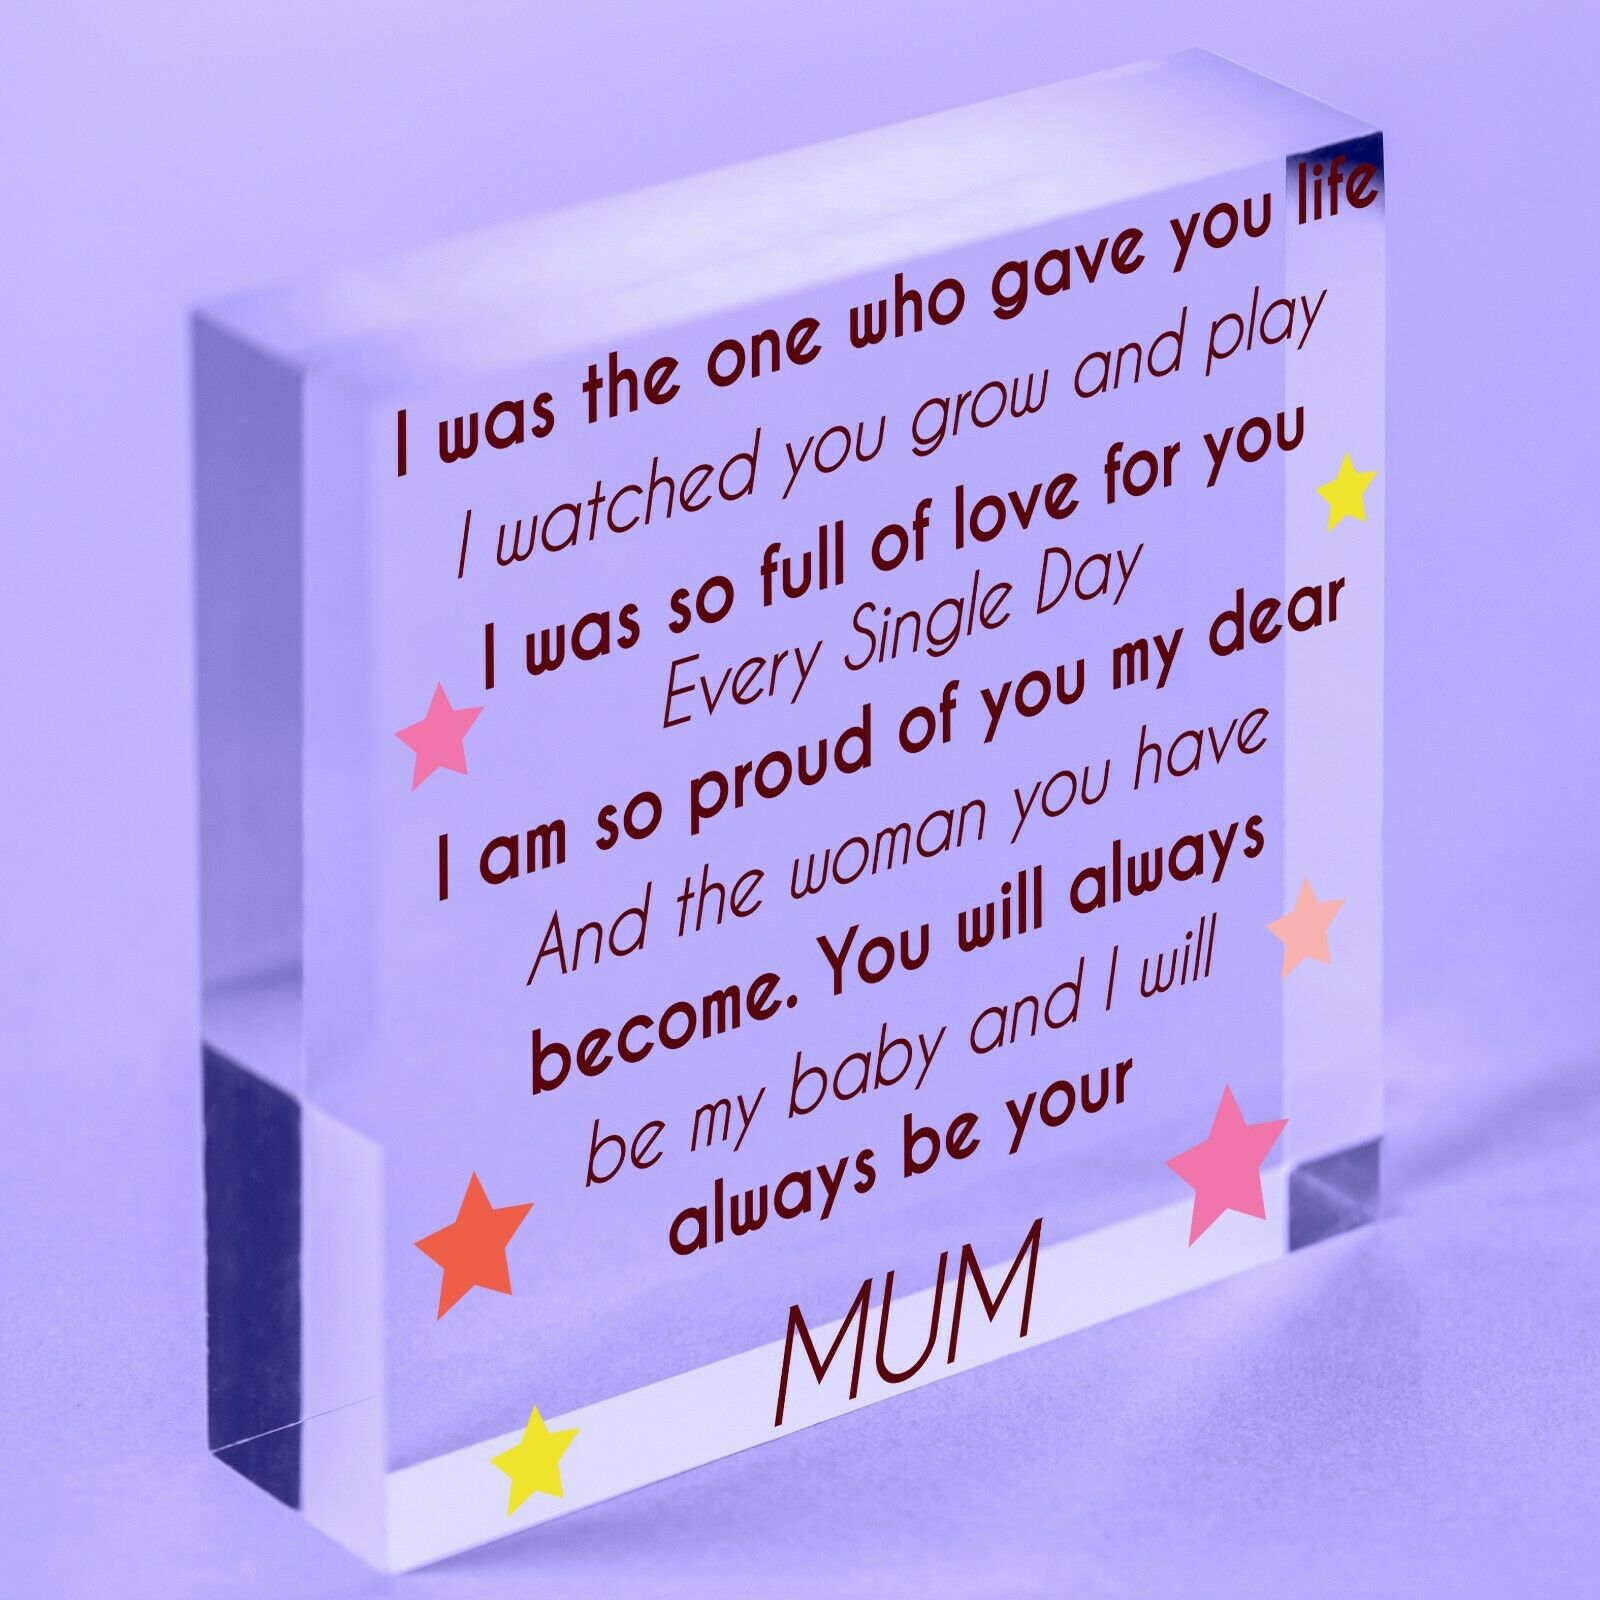 Gave You Life Mother Daughter Acrylic Block Plaque Daughters Love Gift